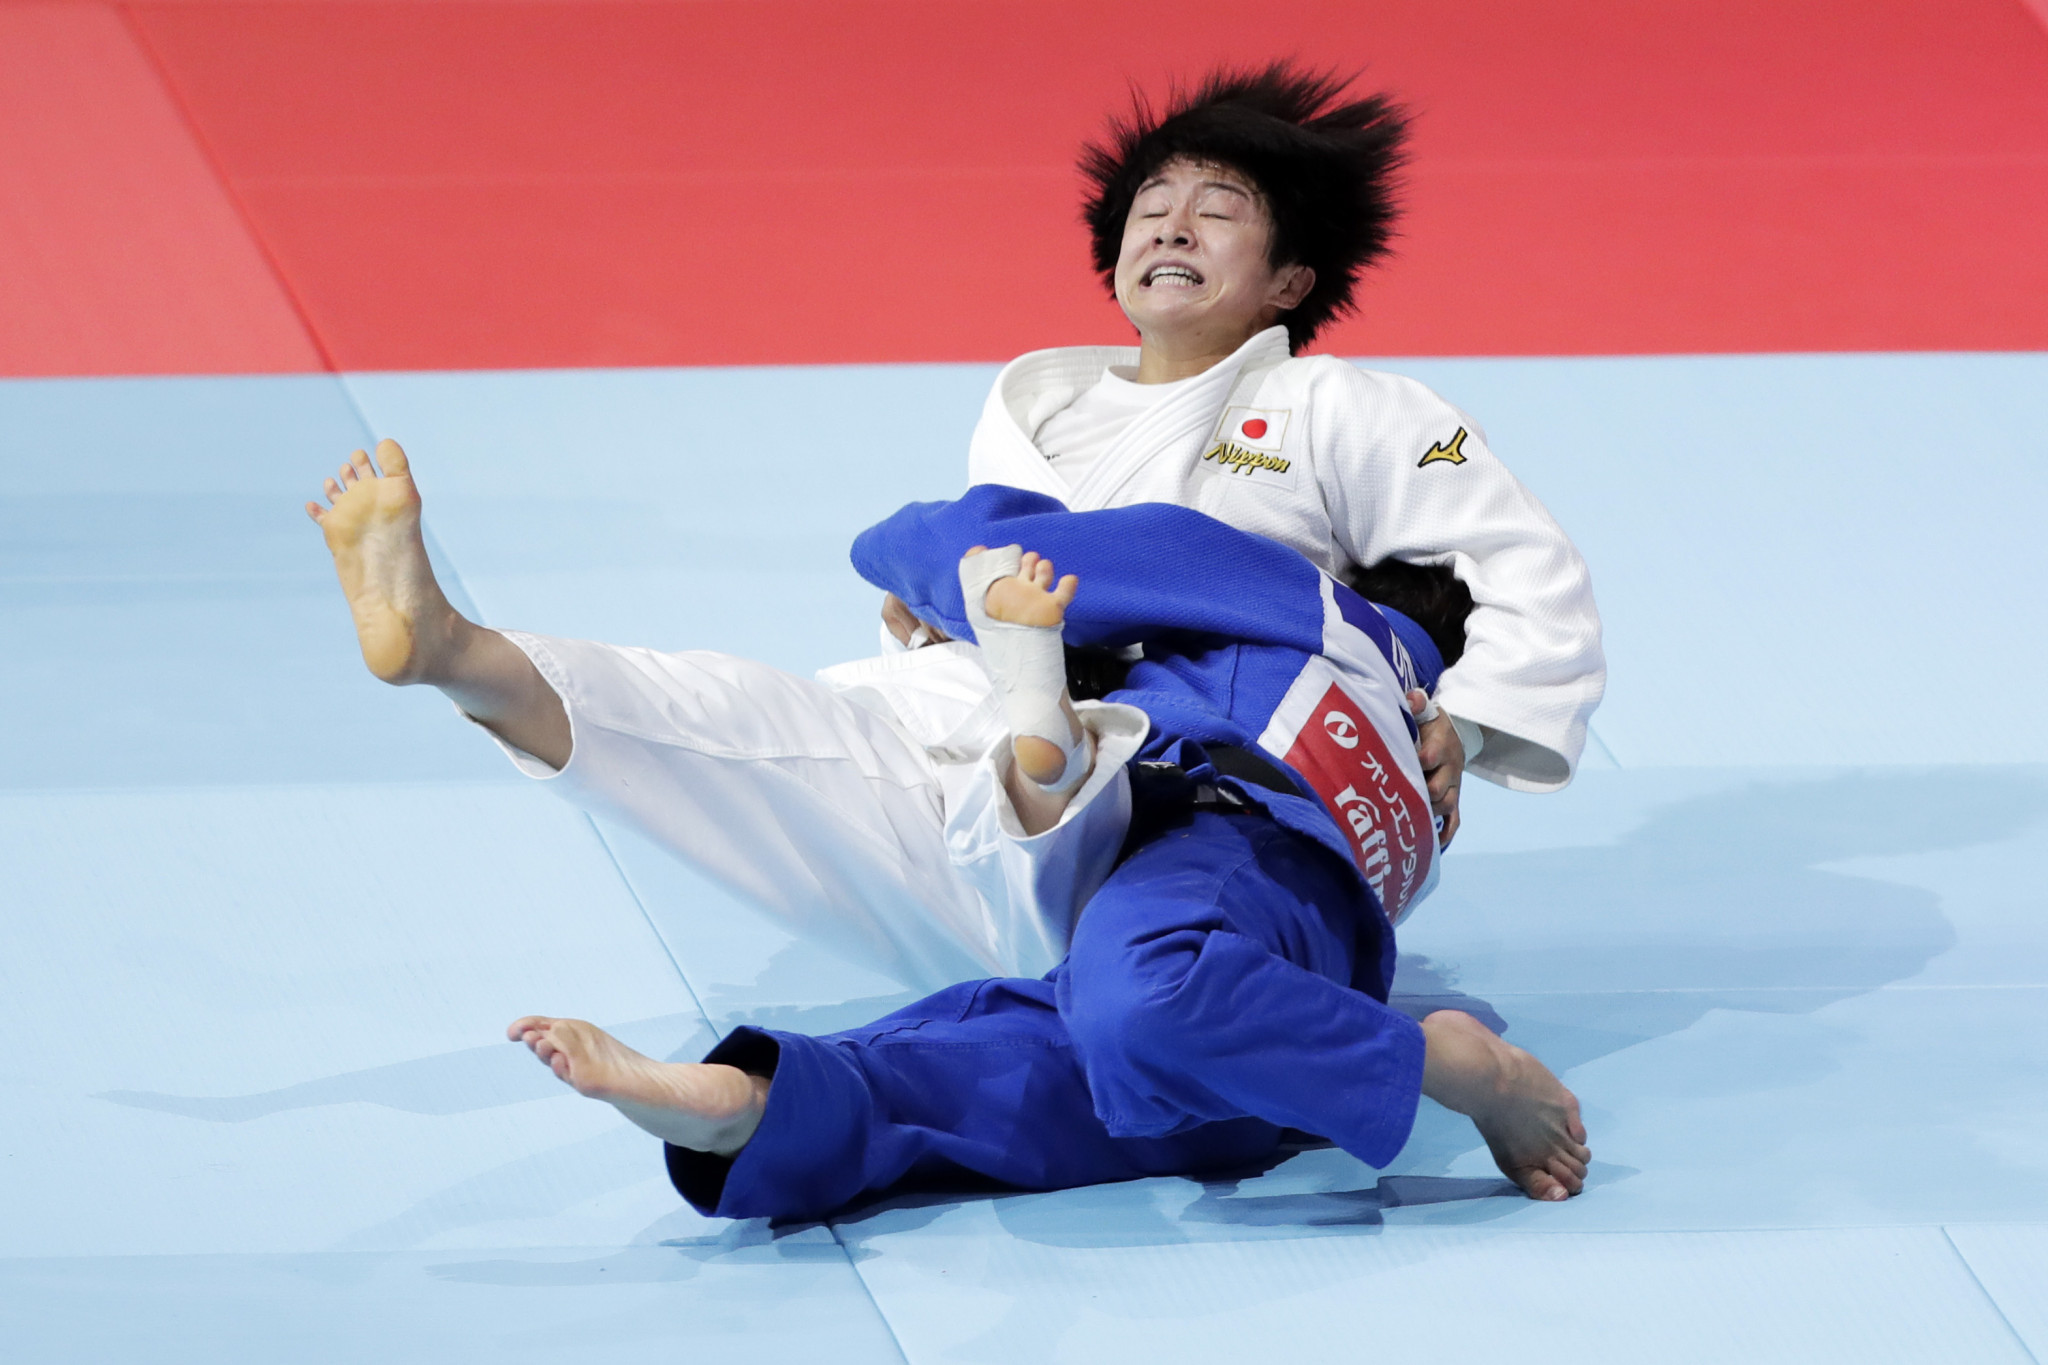 Deguchi threw her former Japanese international team mate to take victory in the golden score period ©Getty Images